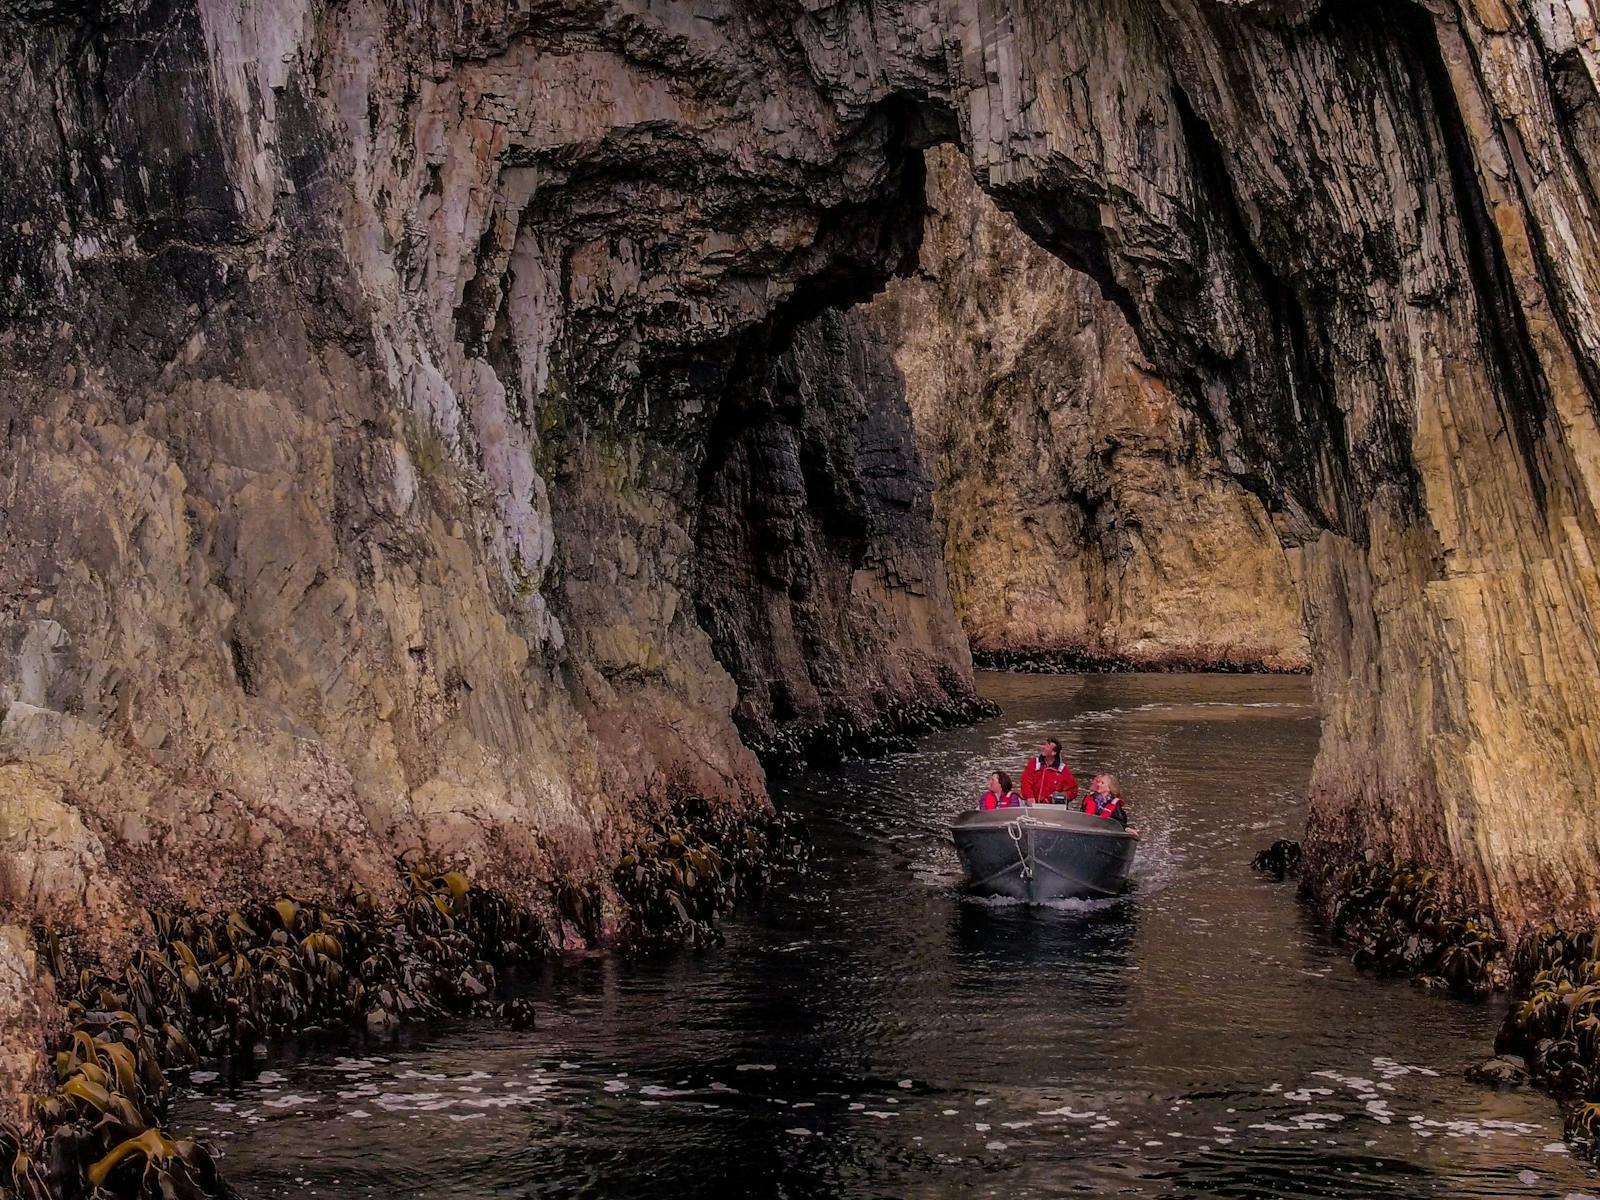 A group of people in a small boat, navigating through a cave